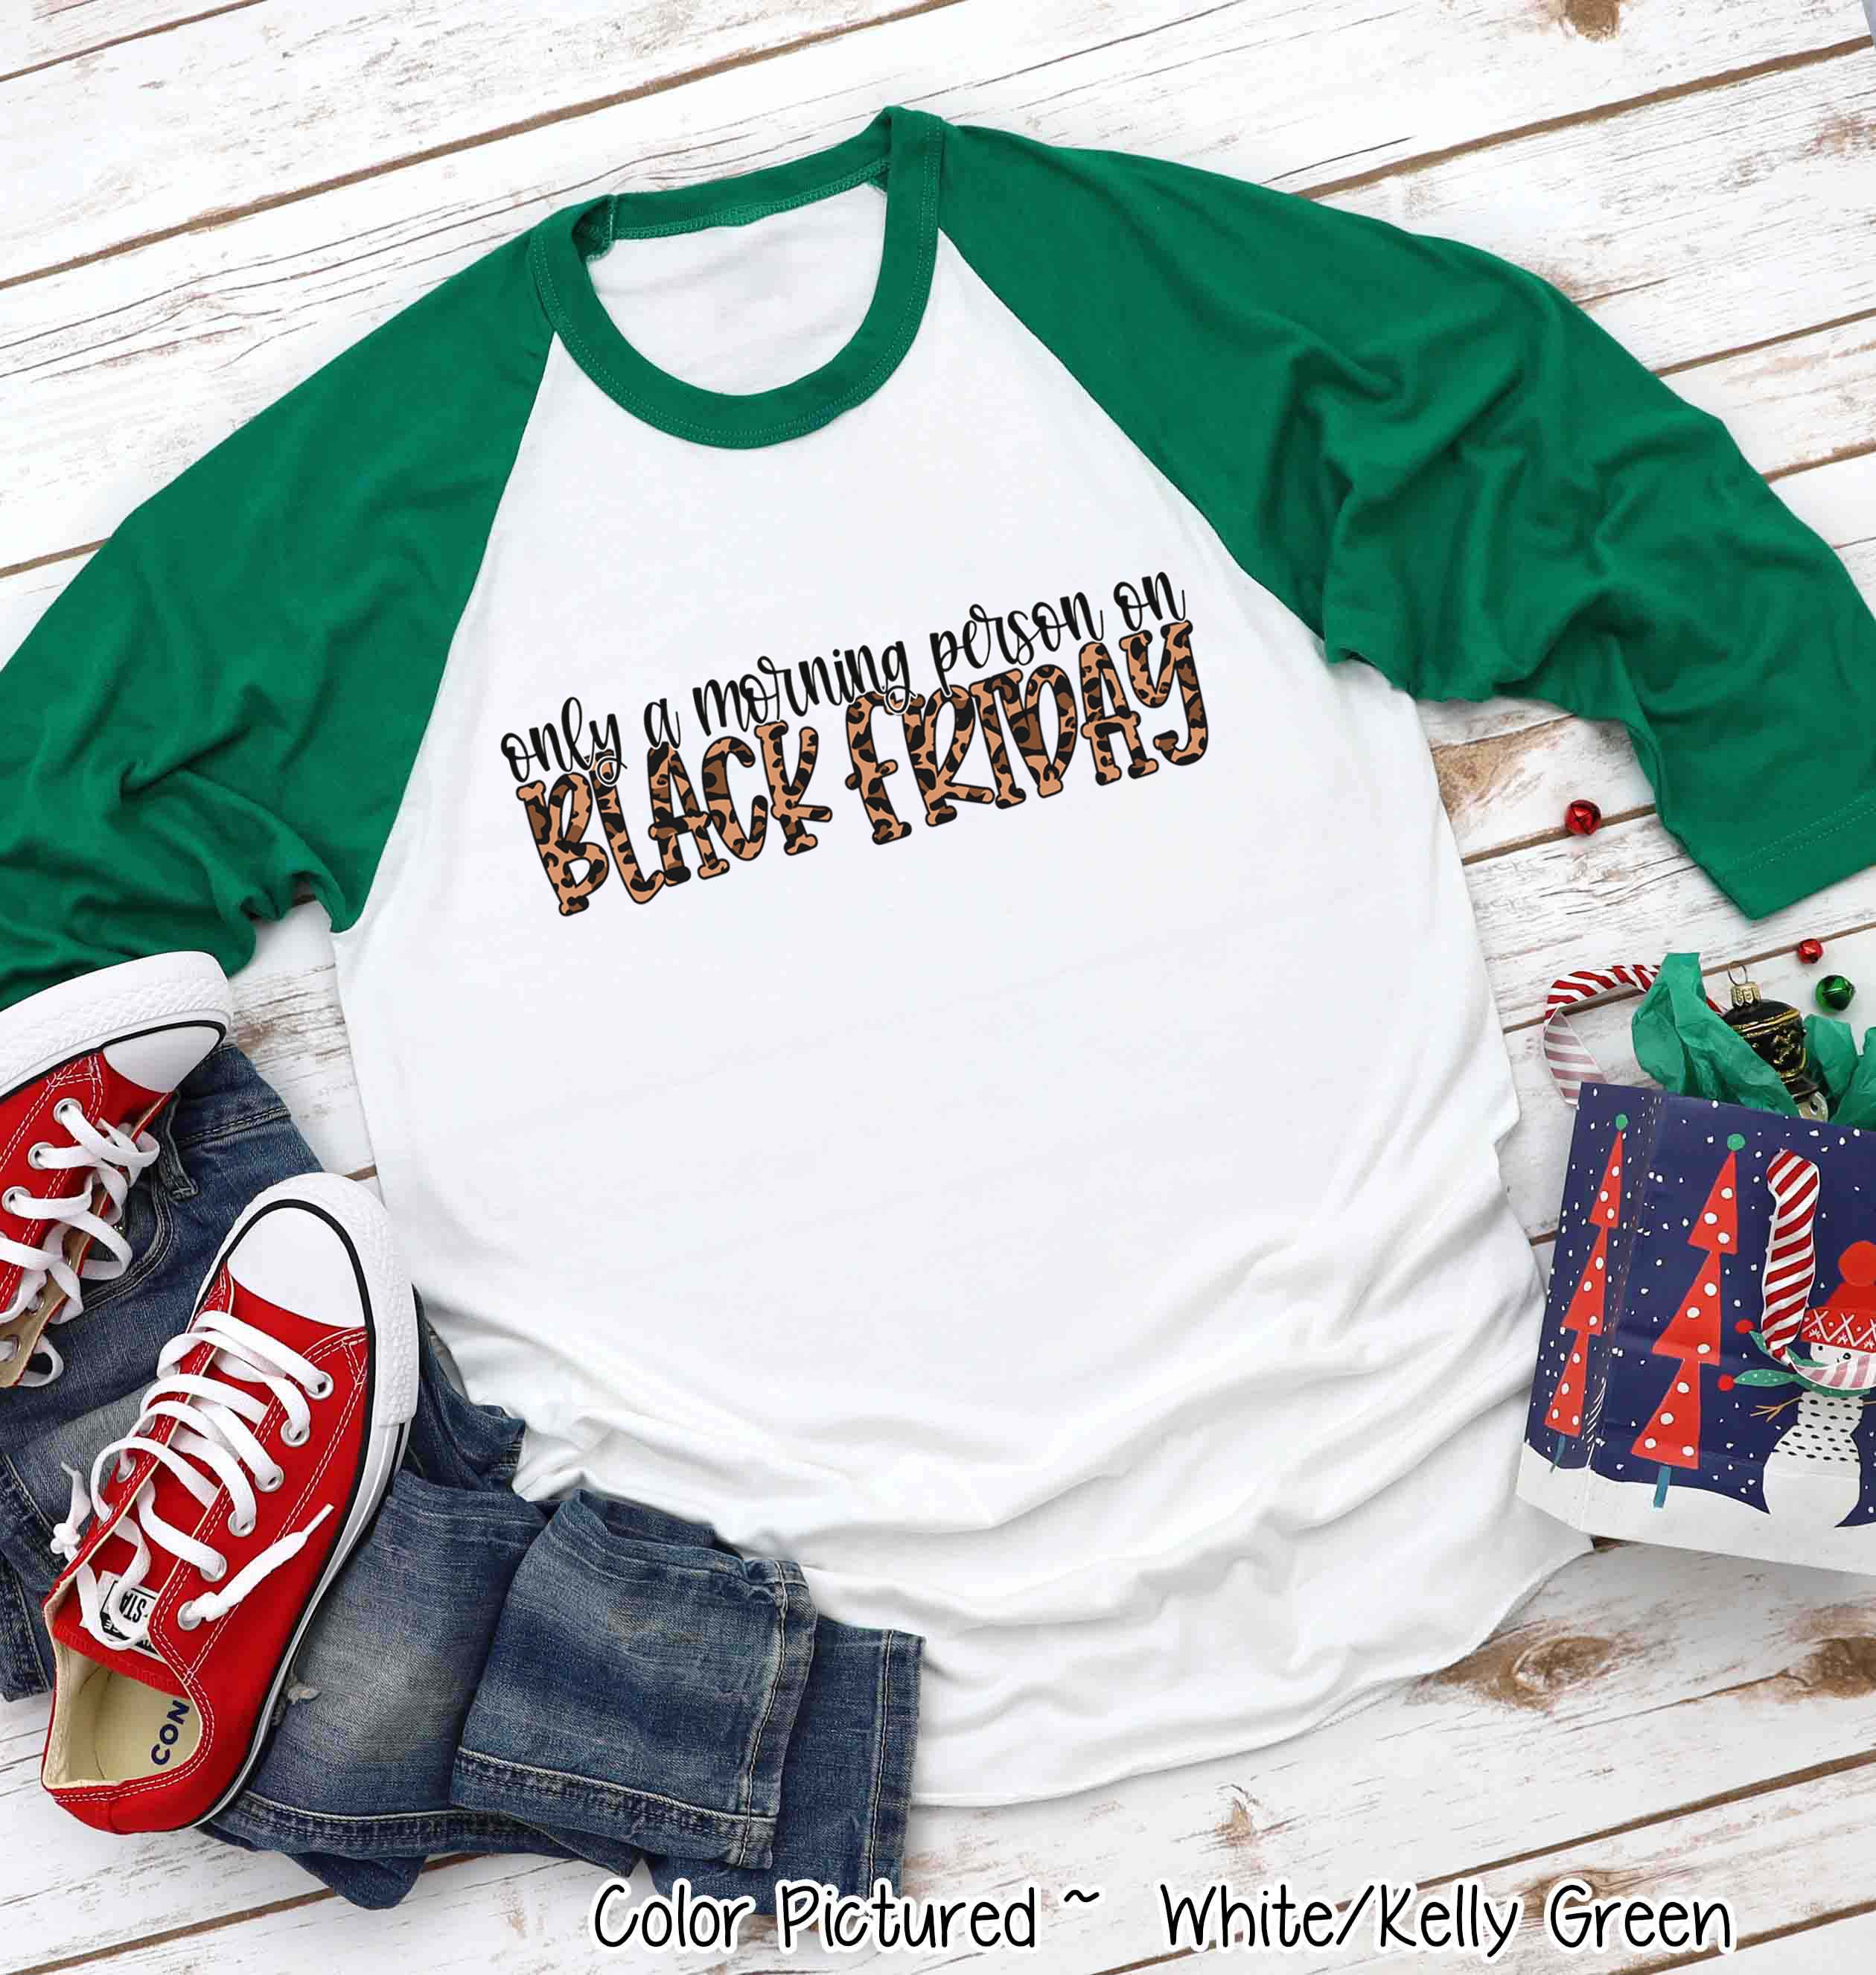 Only A Morning Person on Black Friday Funny Holiday Raglan Tee